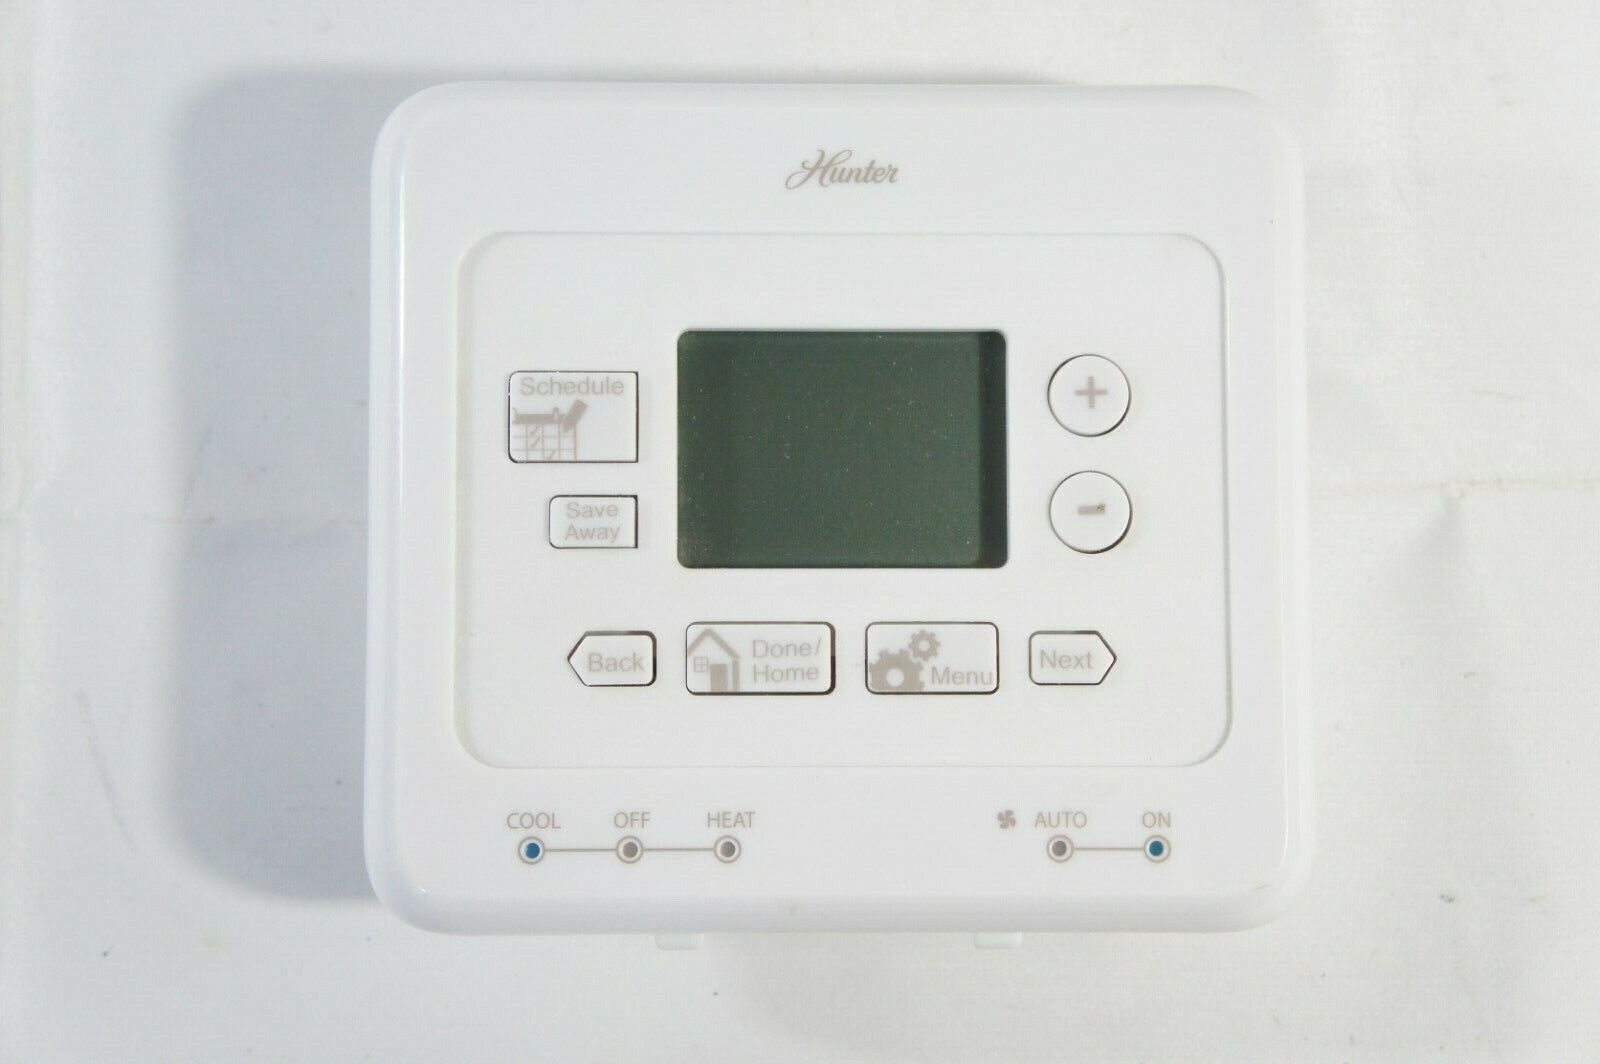 Hunter 5-1-1 Progammable Thermostat Gas/Oil/Electrical Heat Pump #44273